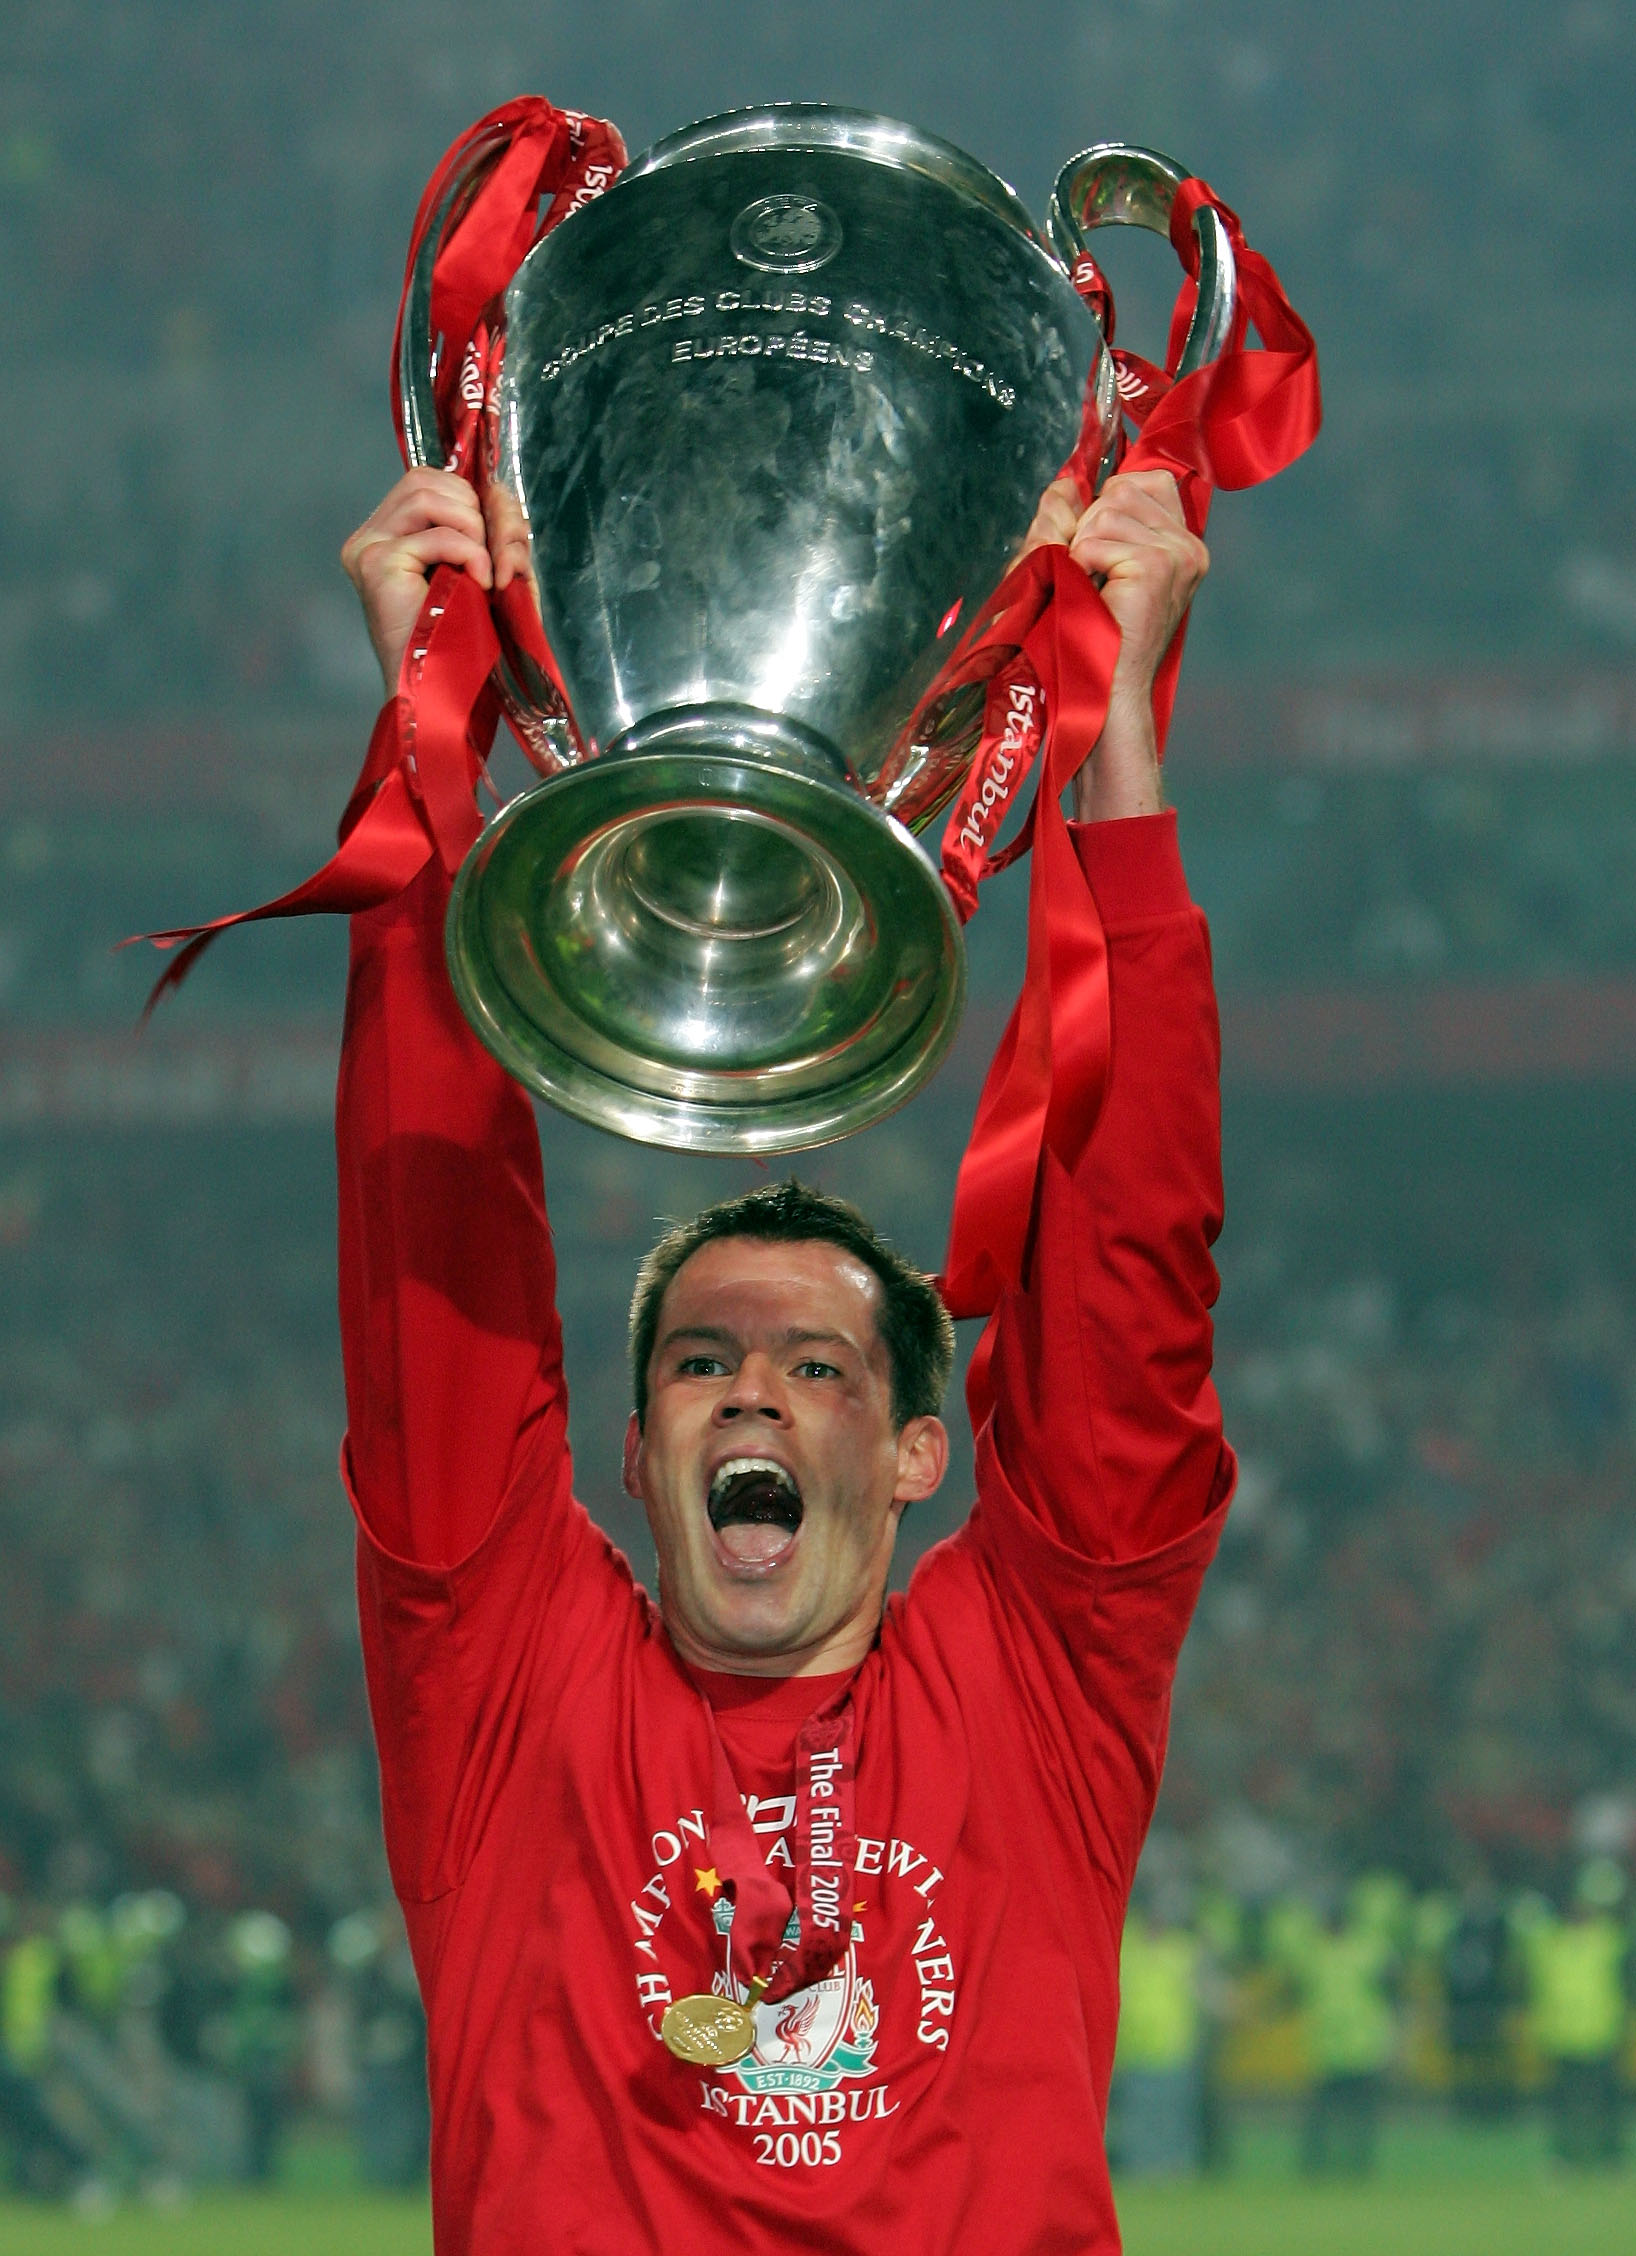 ISTANBUL, TURKEY - MAY 25:  Liverpool defender Jamie Carragher lifts the European Cup after Liverpool won the European Champions League final against AC Milan on May 25, 2005 at the Ataturk Olympic Stadium in Istanbul, Turkey.  (Photo by Alex Livesey/Gett